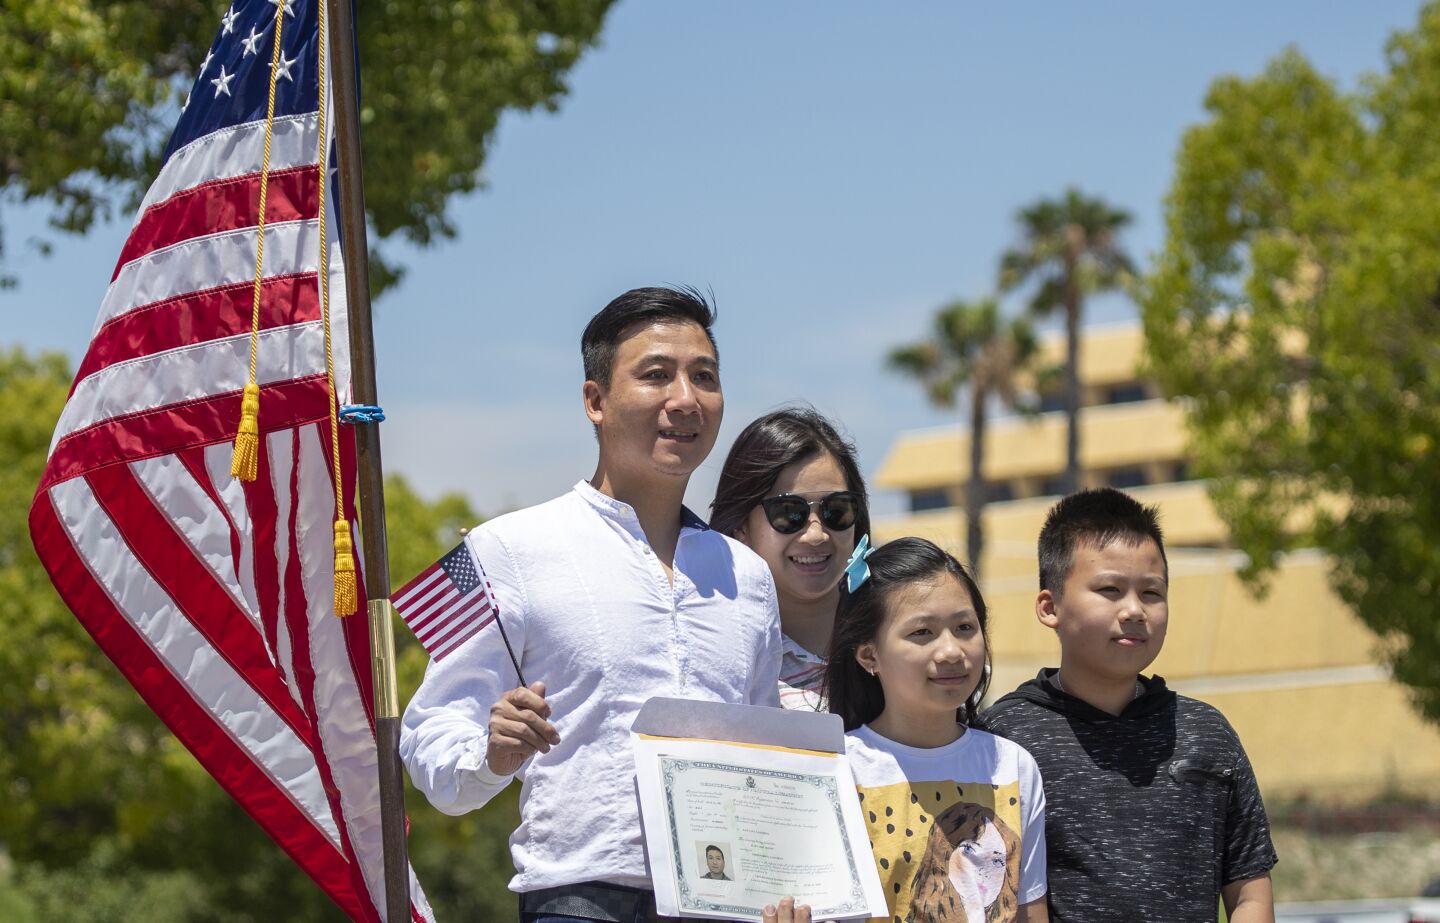 Tuyen Nguyen, who immigrated to Garden Grove from Vietnam, takes a celebatory photo with his wife, Chi Tran, and children.